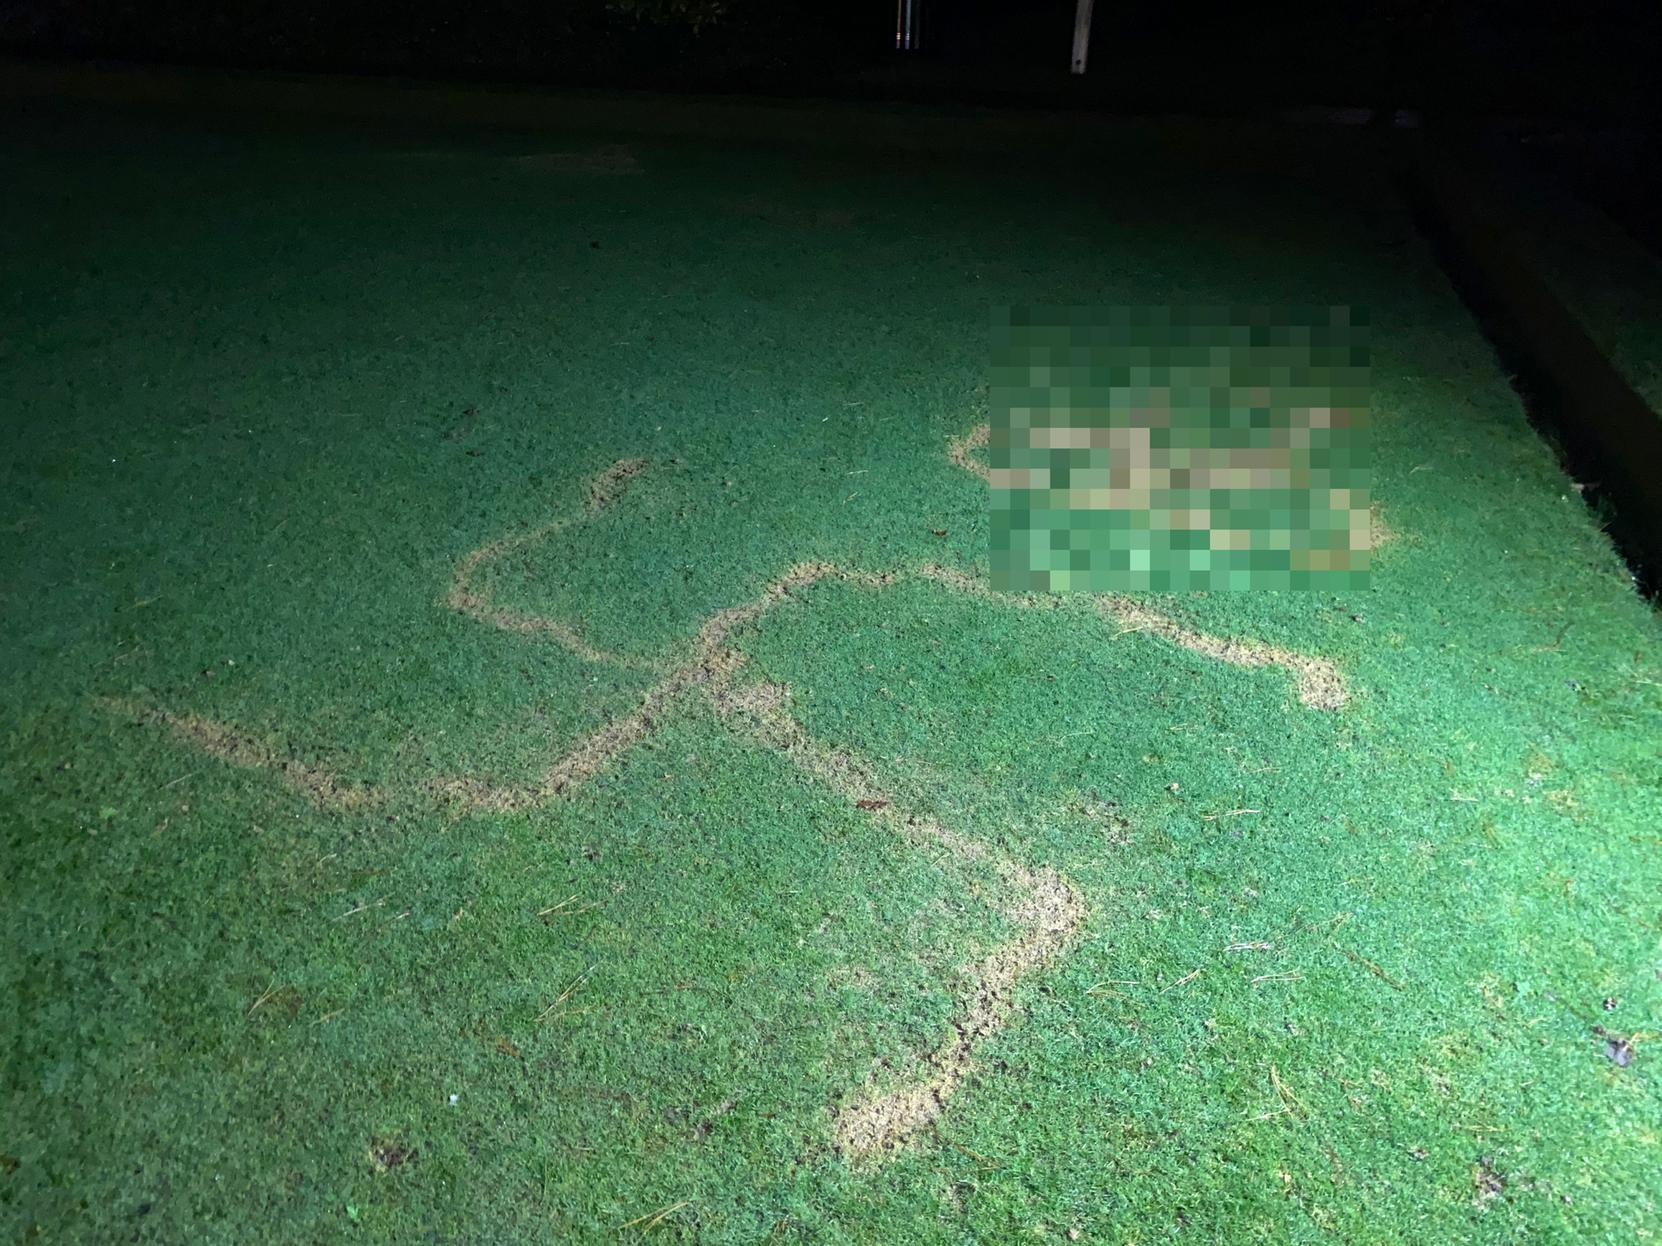 Church House Grounds in Tarring has been vandalised